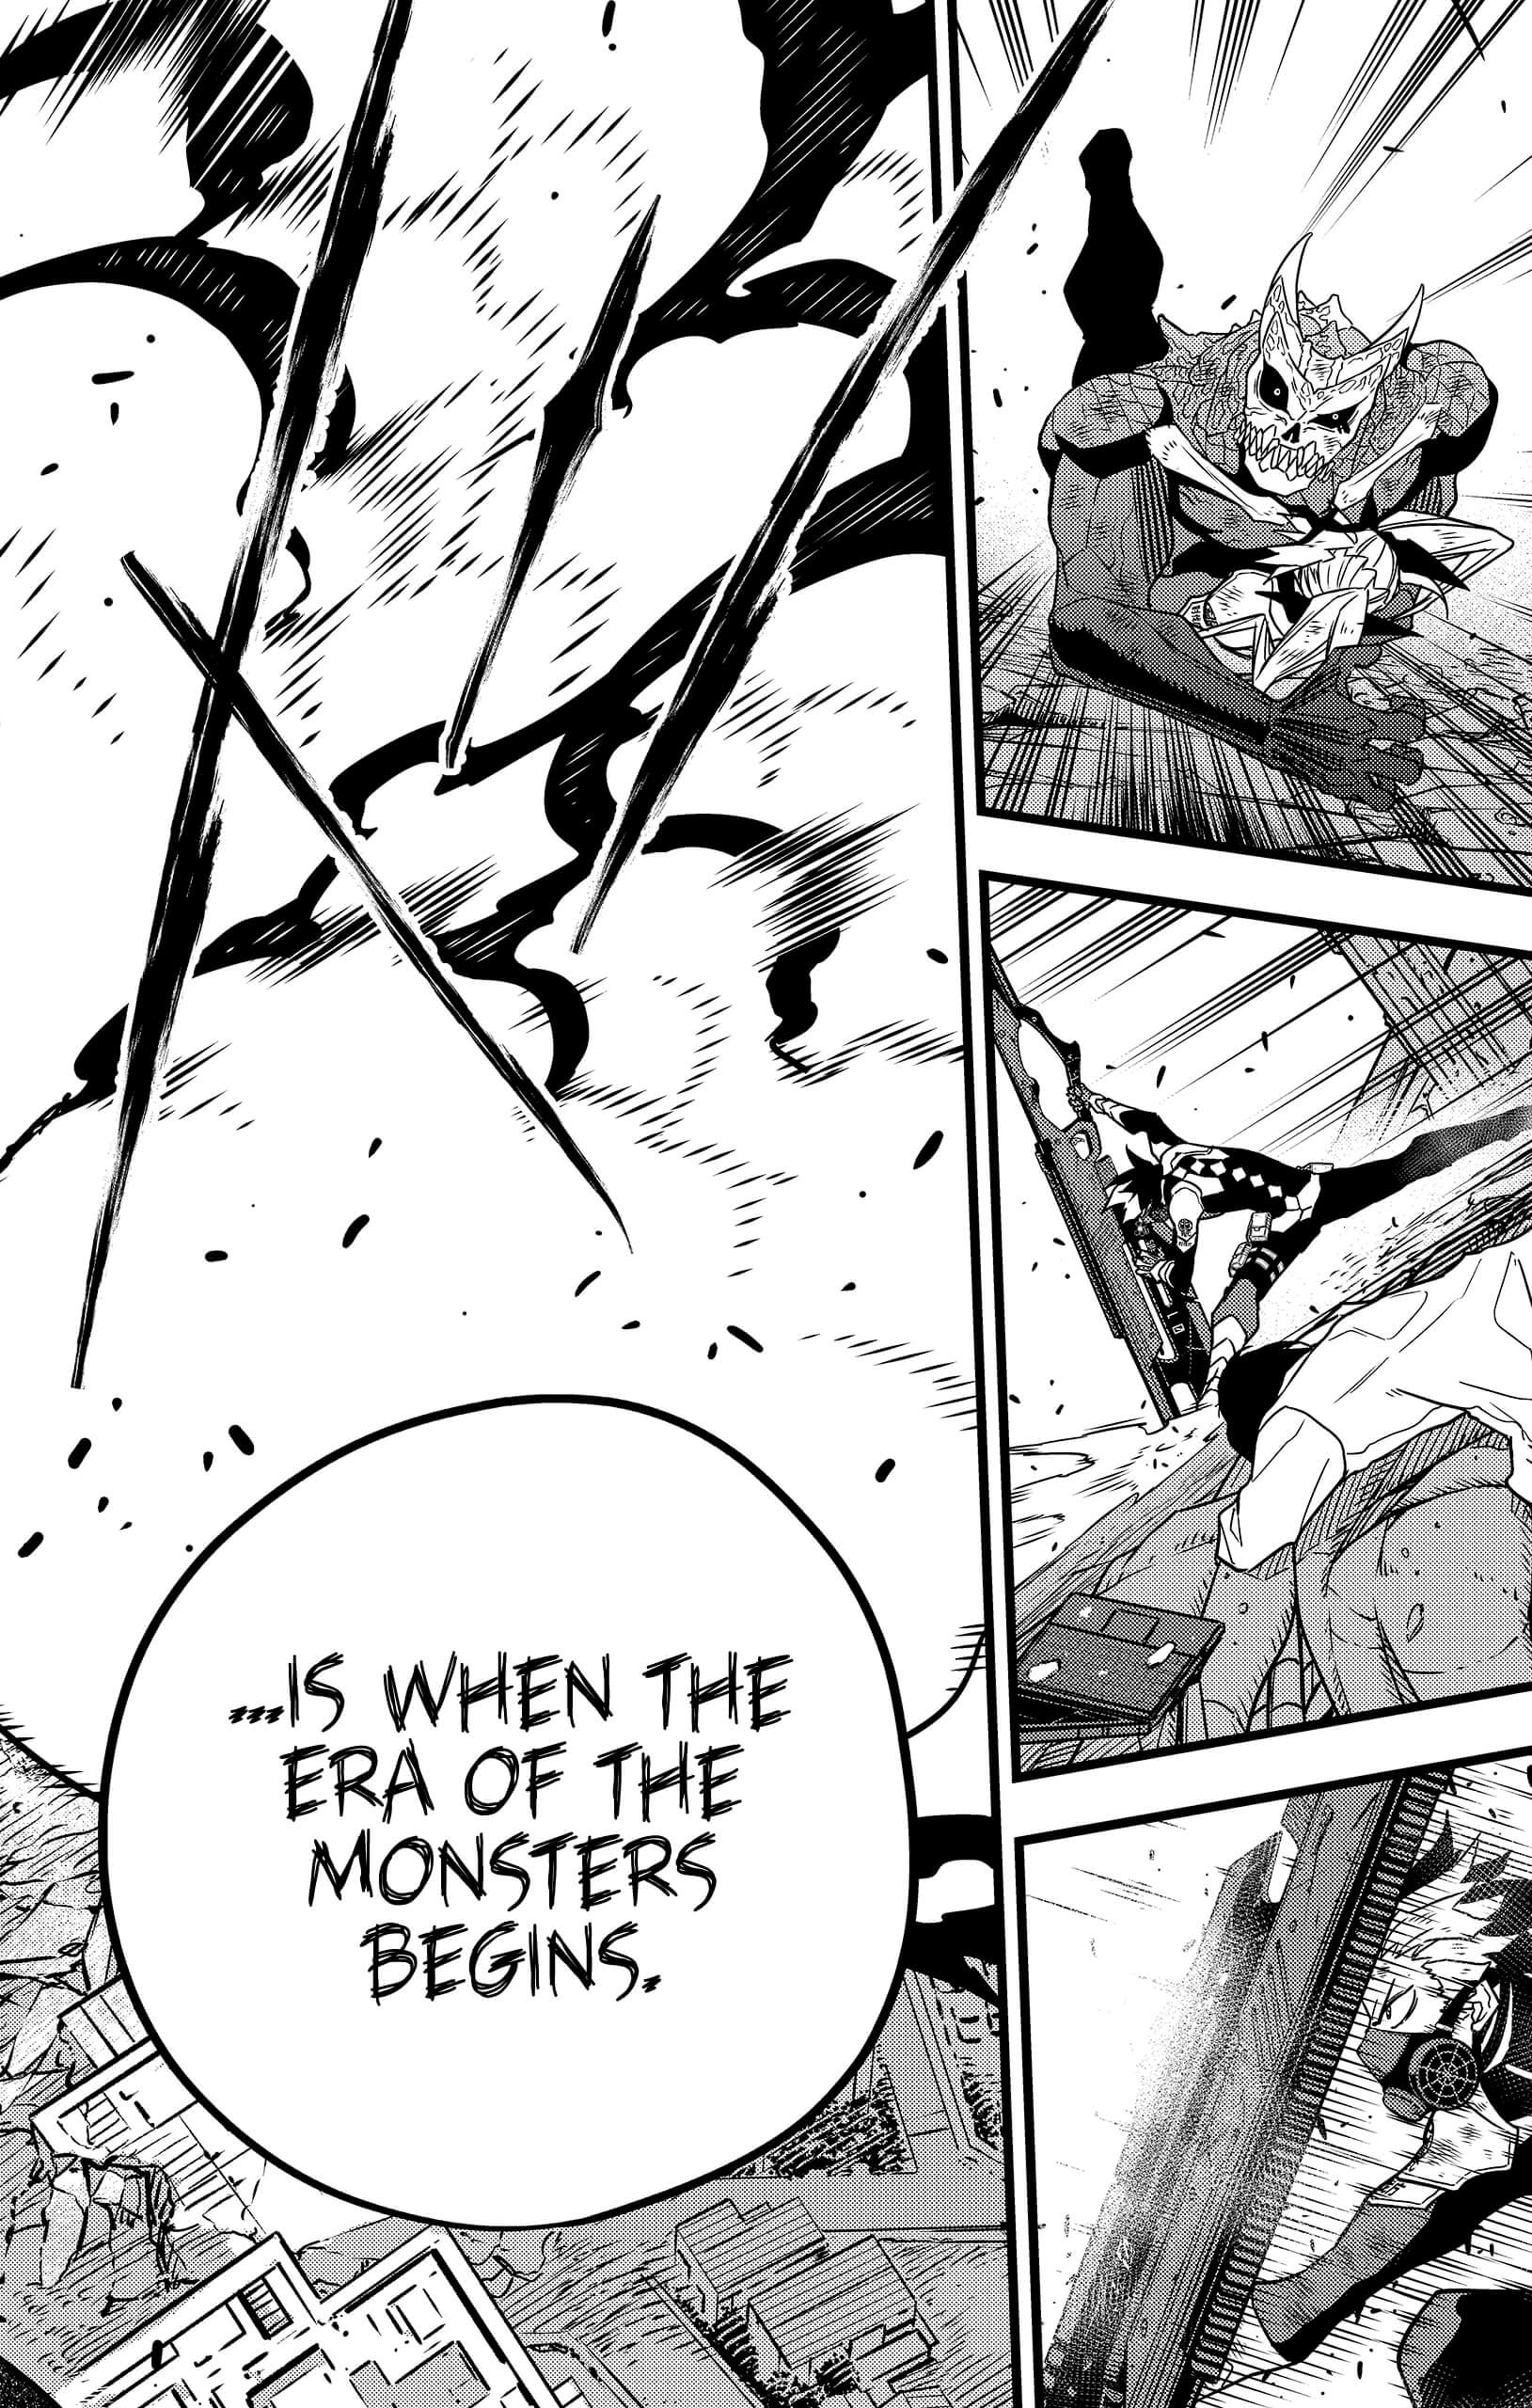 Kaiju no 8 Chapter 53, monster #8 chapter 53